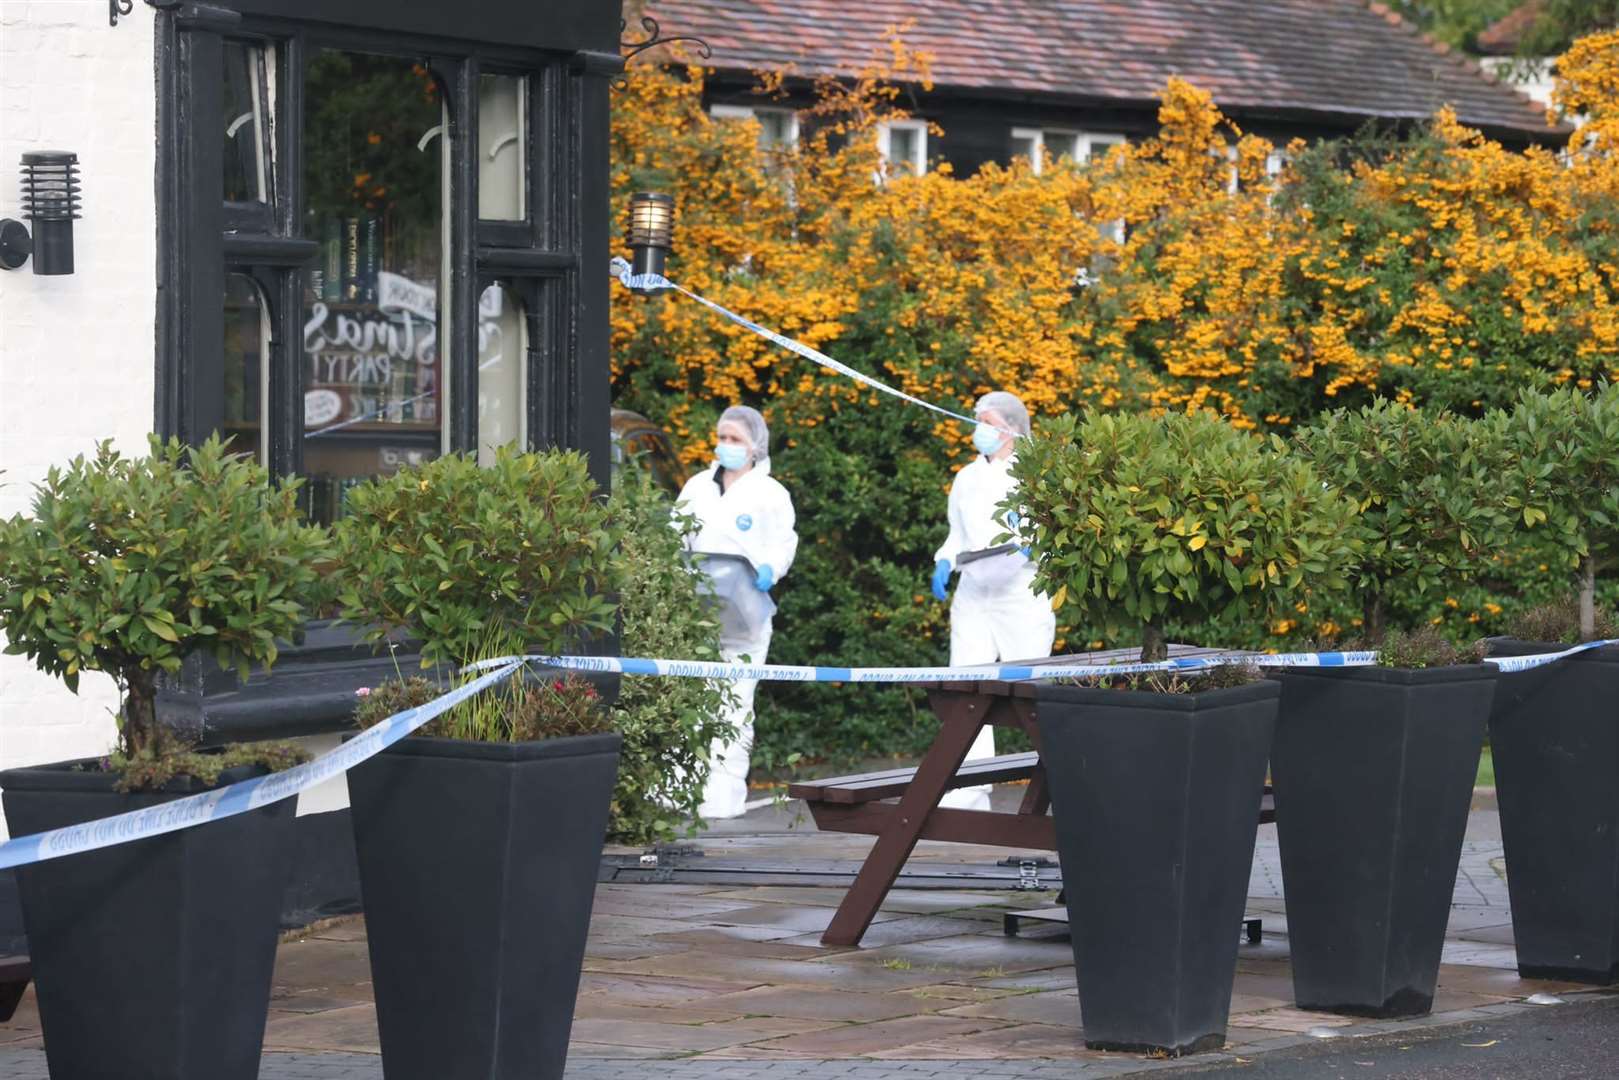 Forensics officers outside the Cricketers pub in Meopham following the fatal stabbing